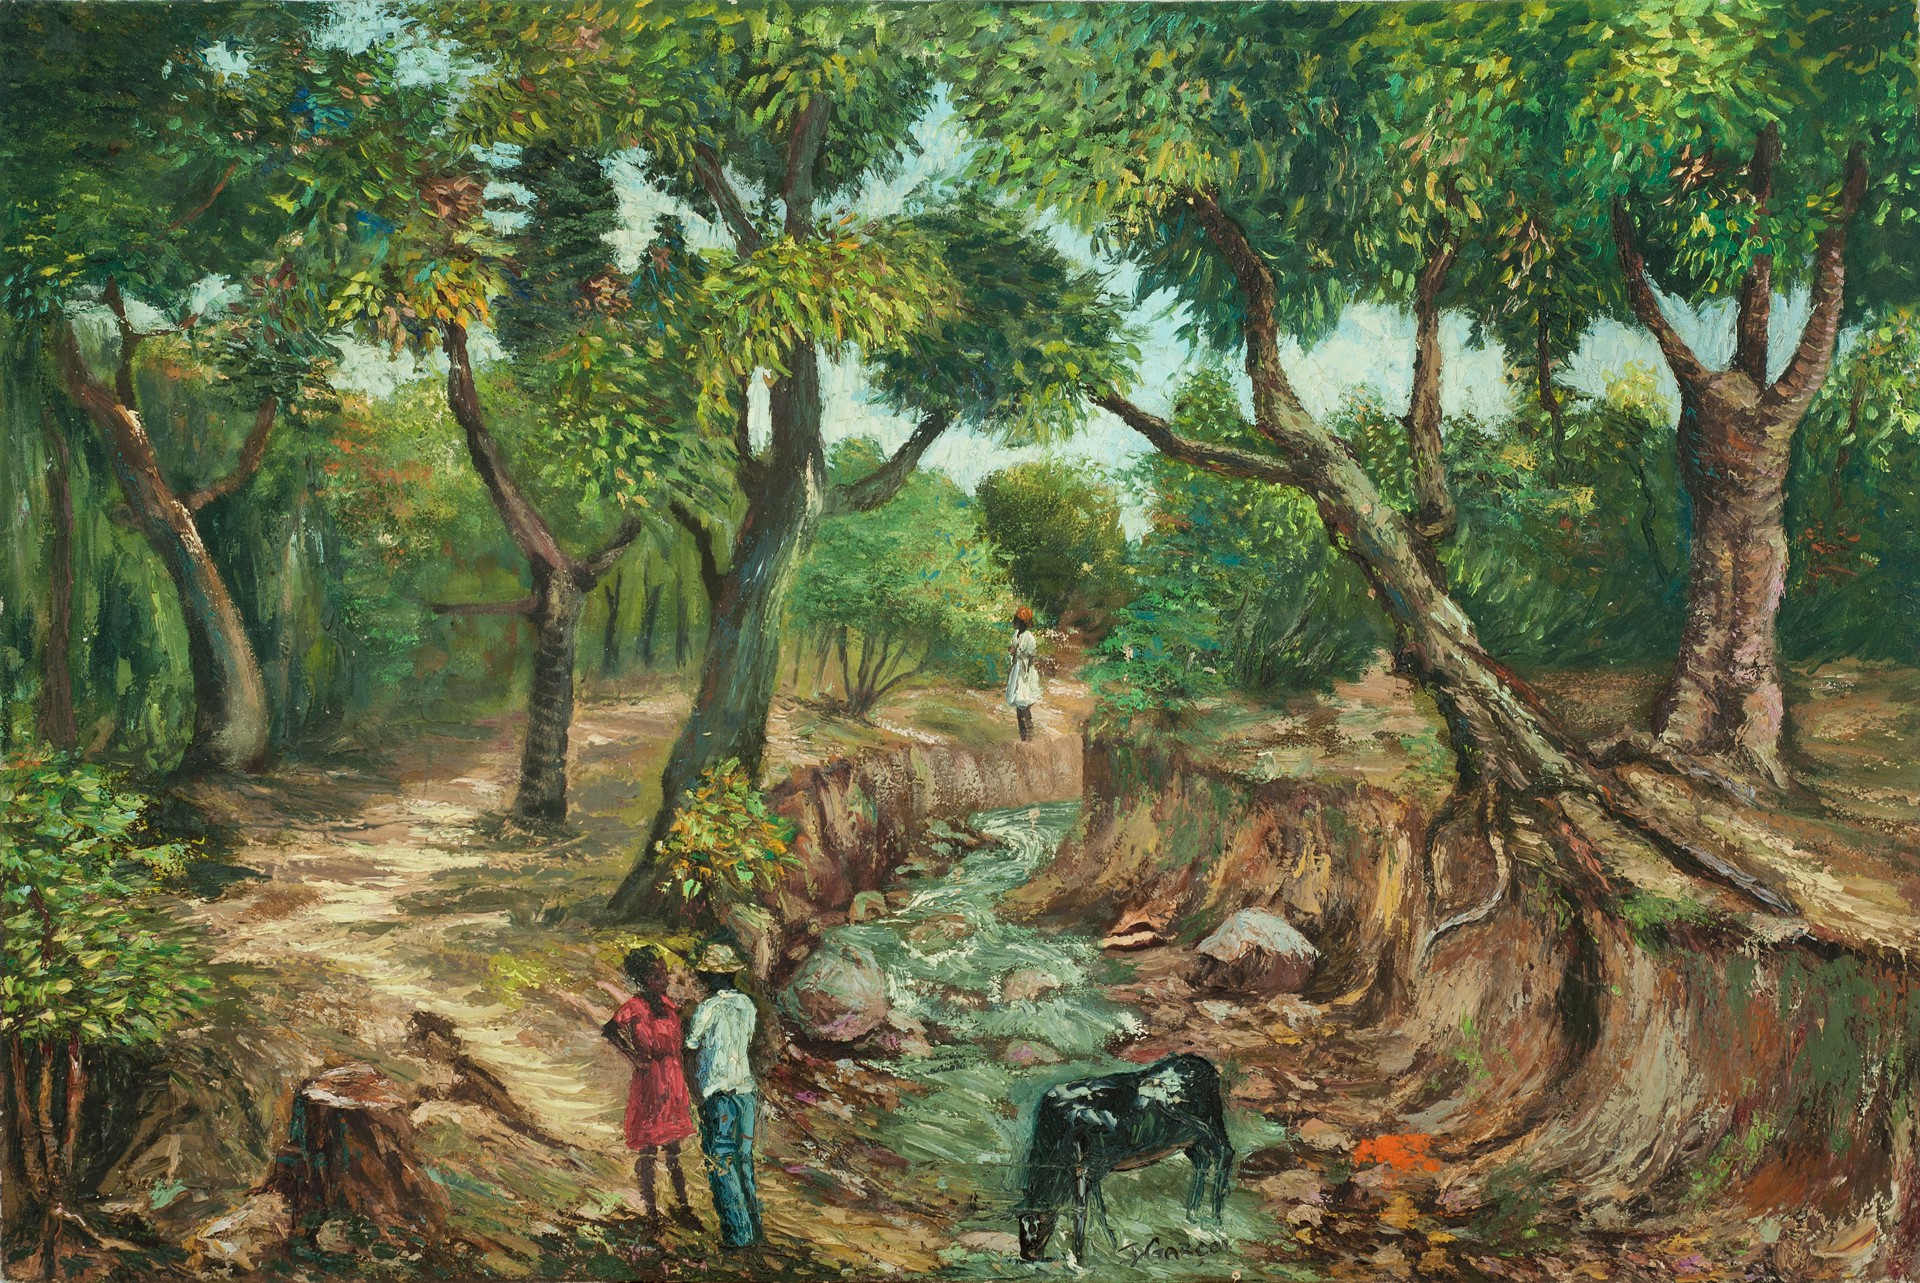 In the Forest #44-3-96GSN by Jacquelin (Jacques) Garcon (Haitian, b.1942)